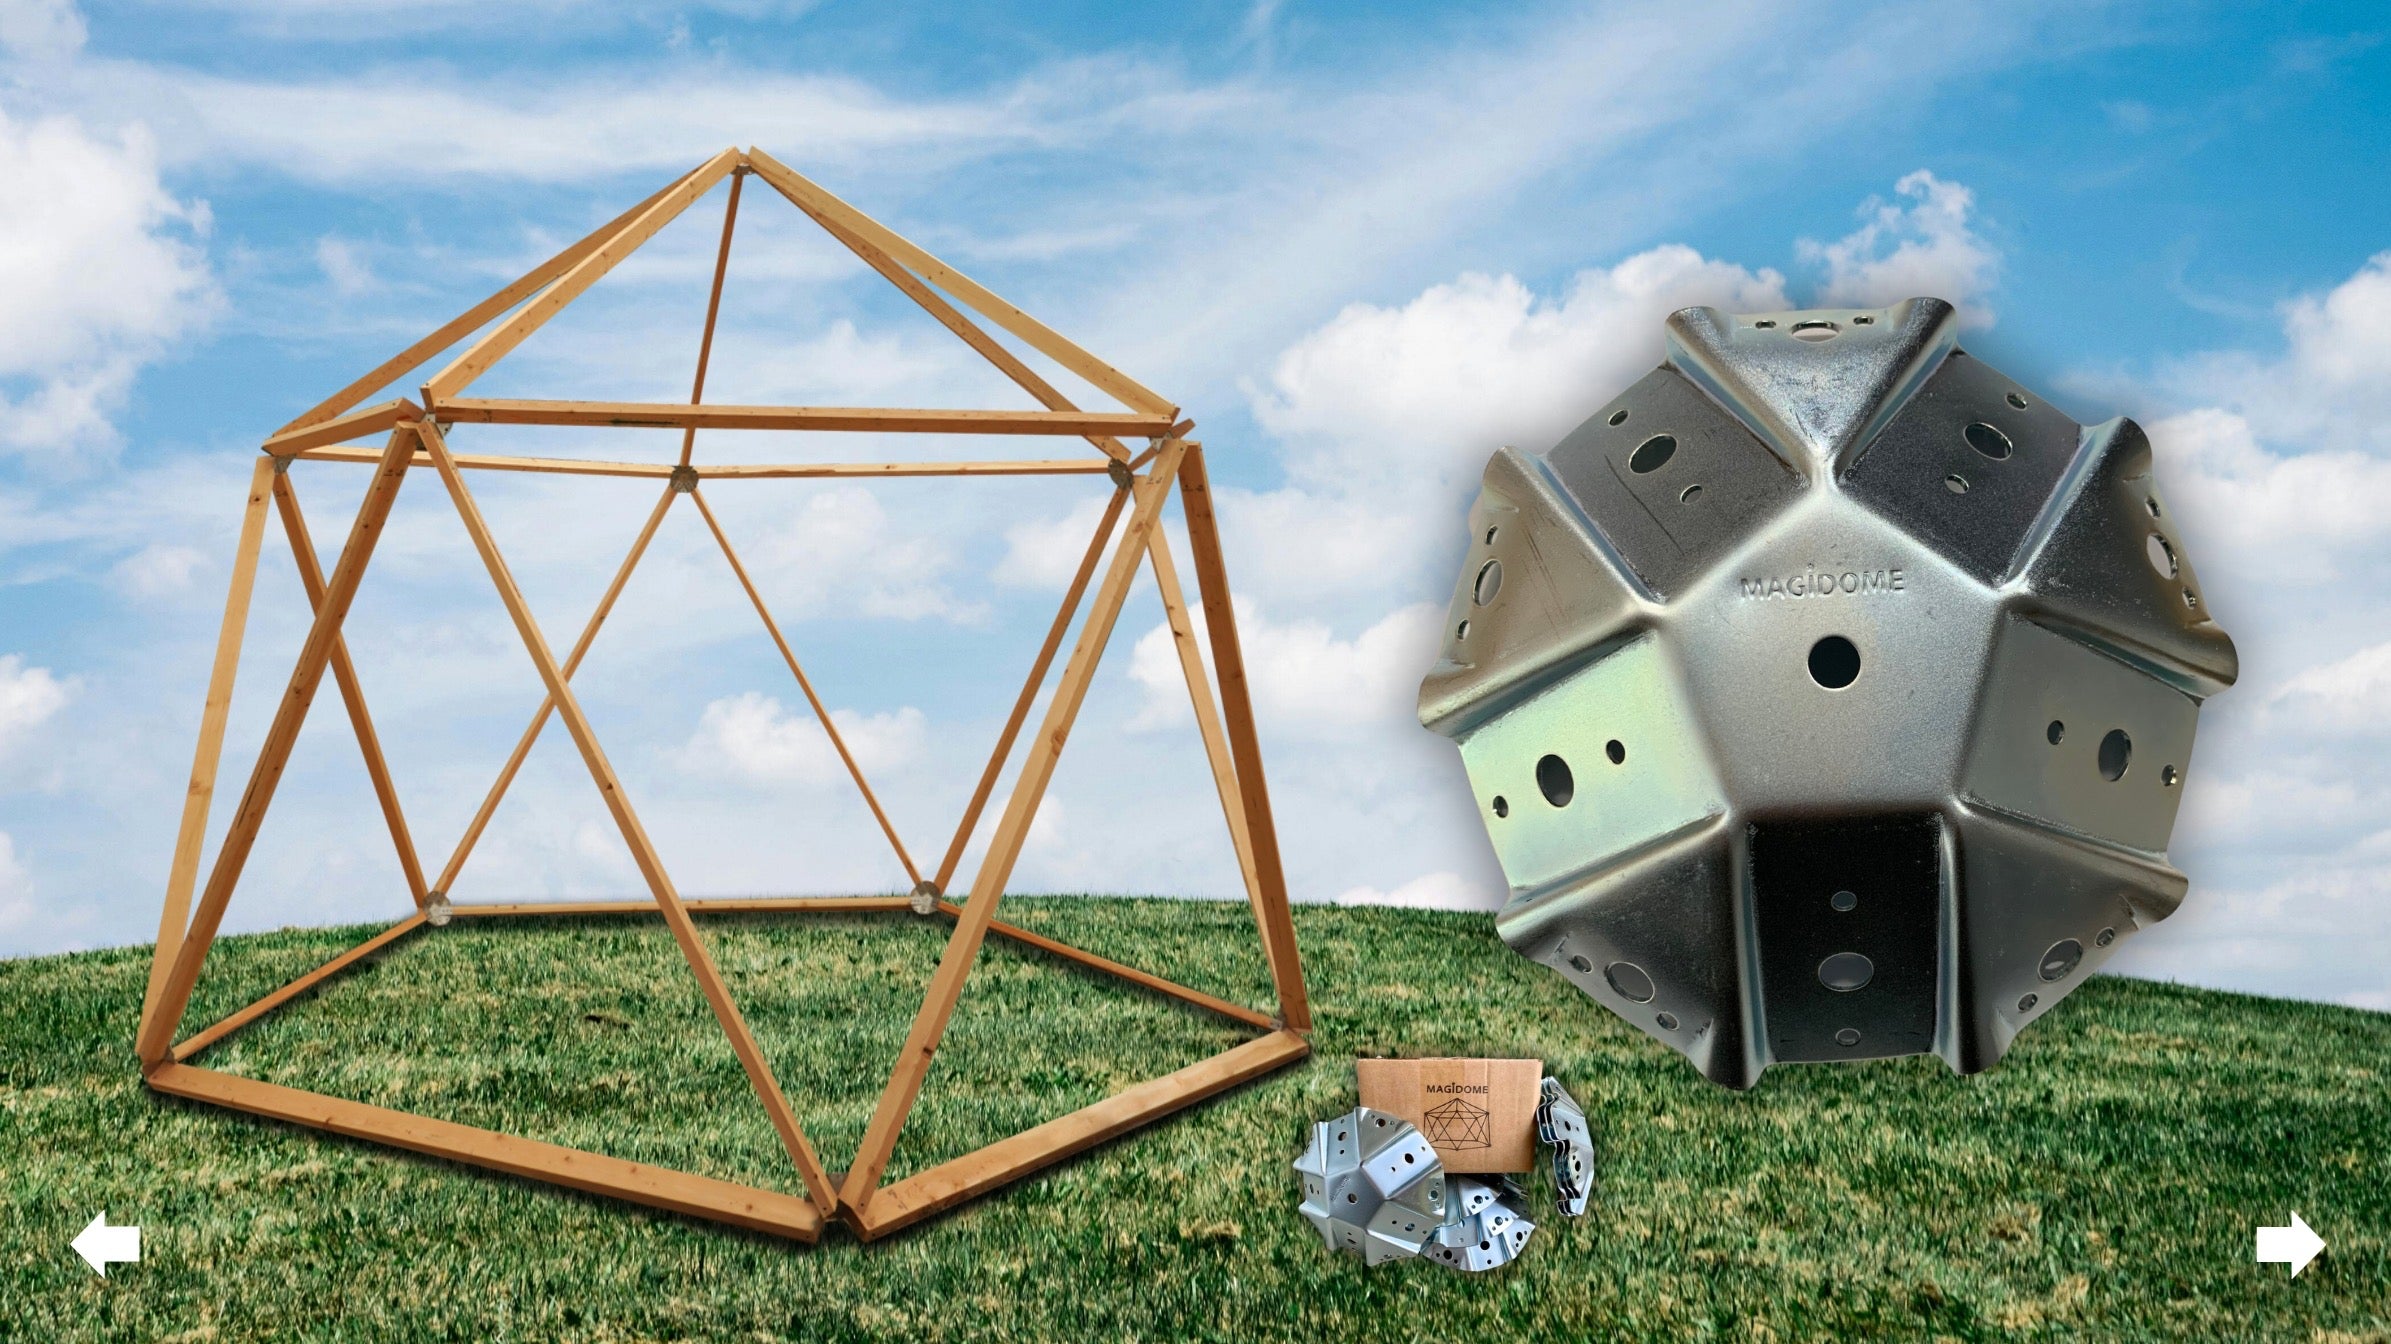 Magidome Geodesic Dome Connectors make building a geodesic dome easy, fun and affordable. Build a diy yurt, greenhouse, chicken coop, festival tent, hunting blind, trellis, gazebo, pergola, fort, shelter, shed, stage, meditation yoga dome! The dome connector!